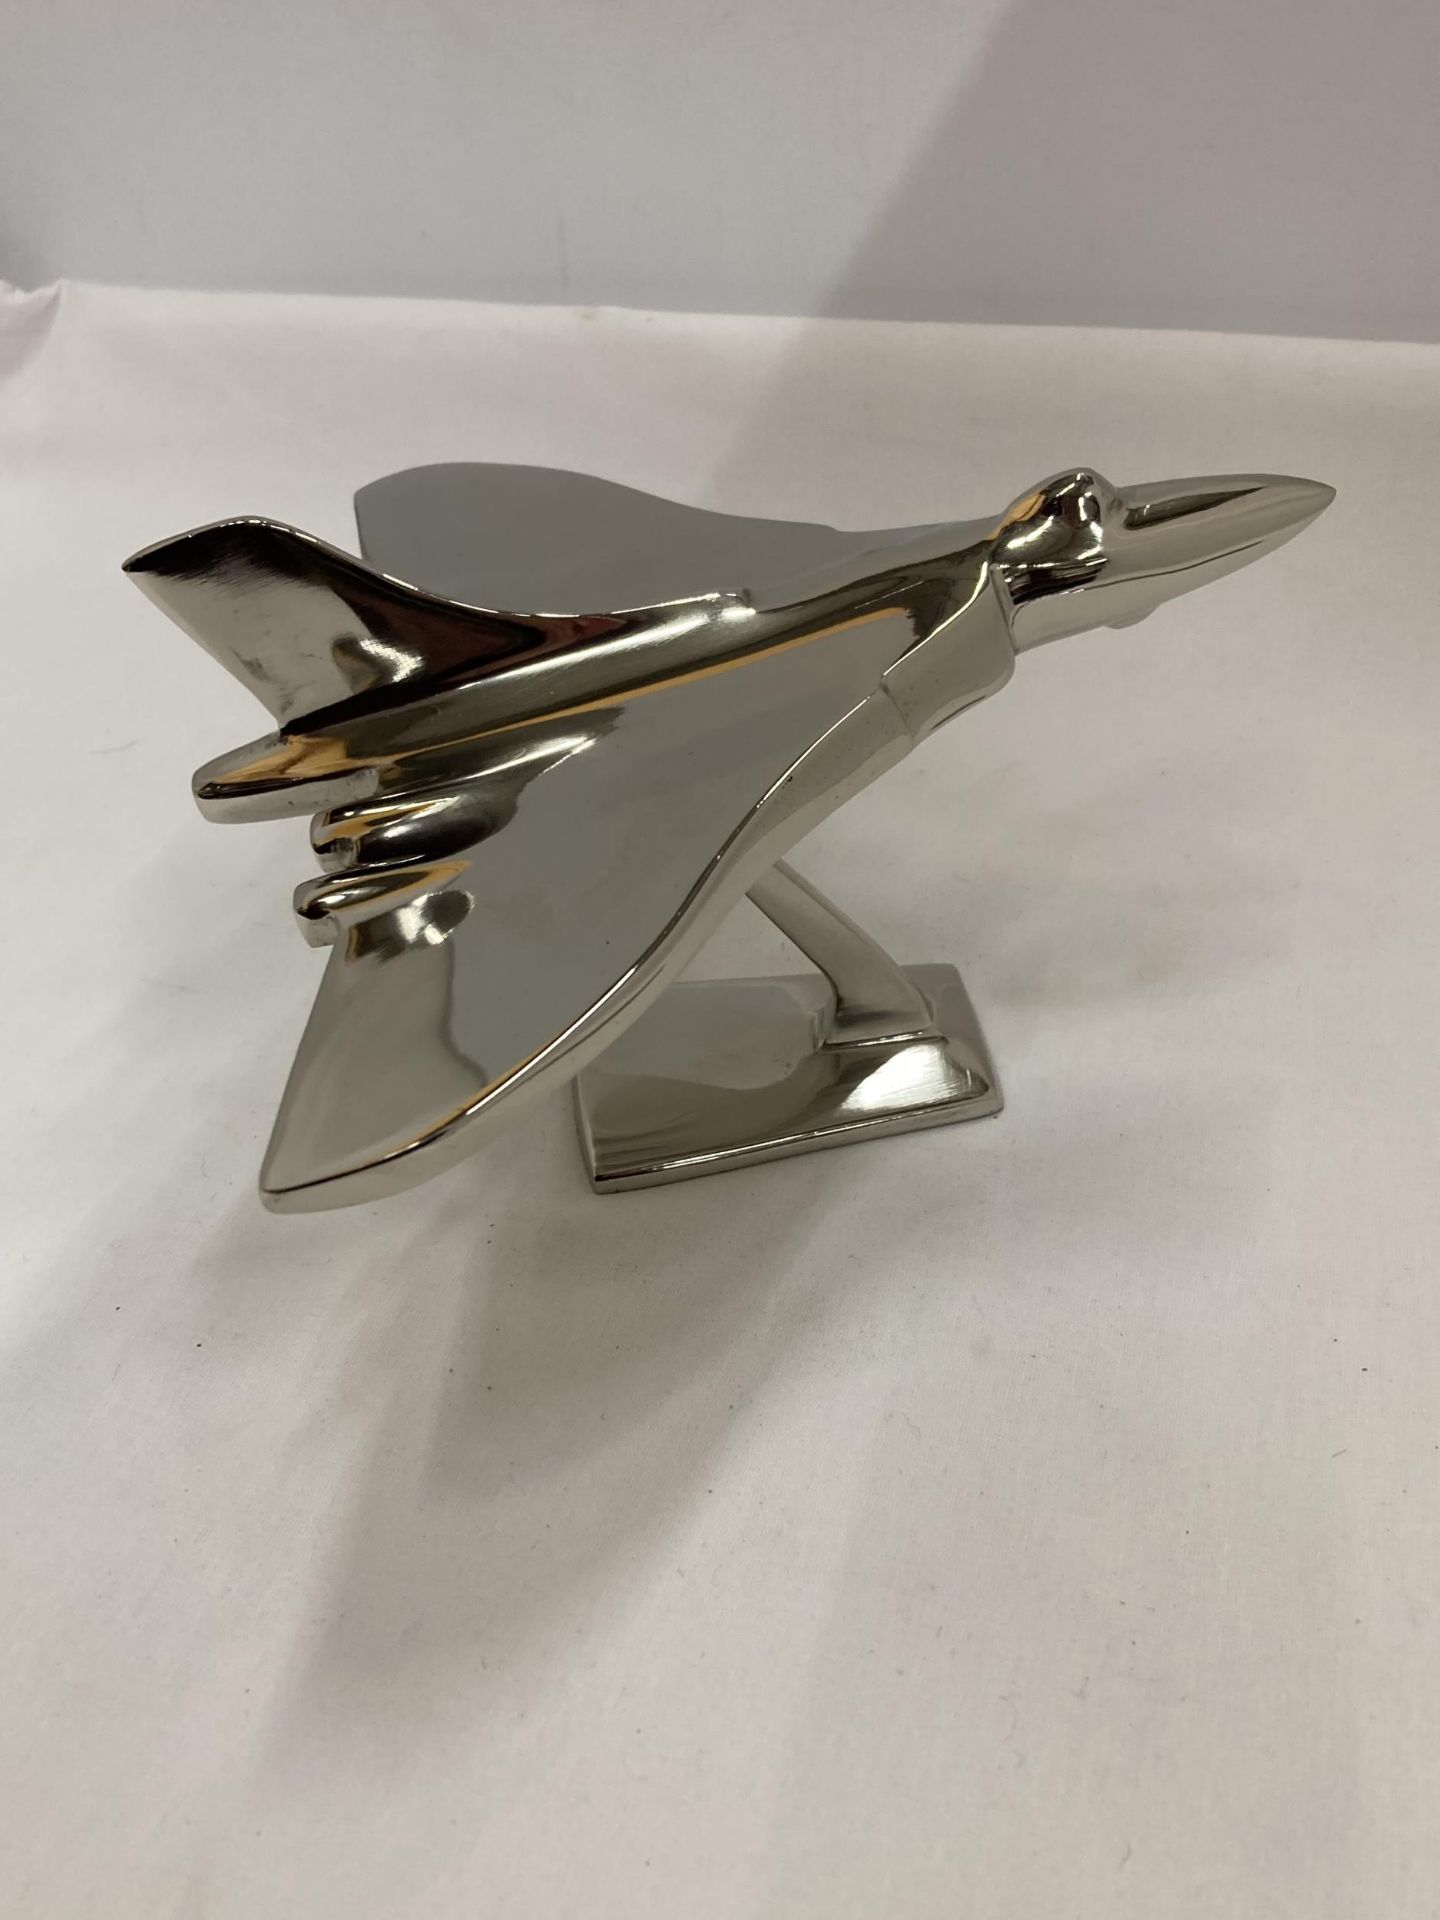 A CHROME MODEL OF A VULCAN BOMBER ON A STAND, HEIGHT 14CM - Image 3 of 3